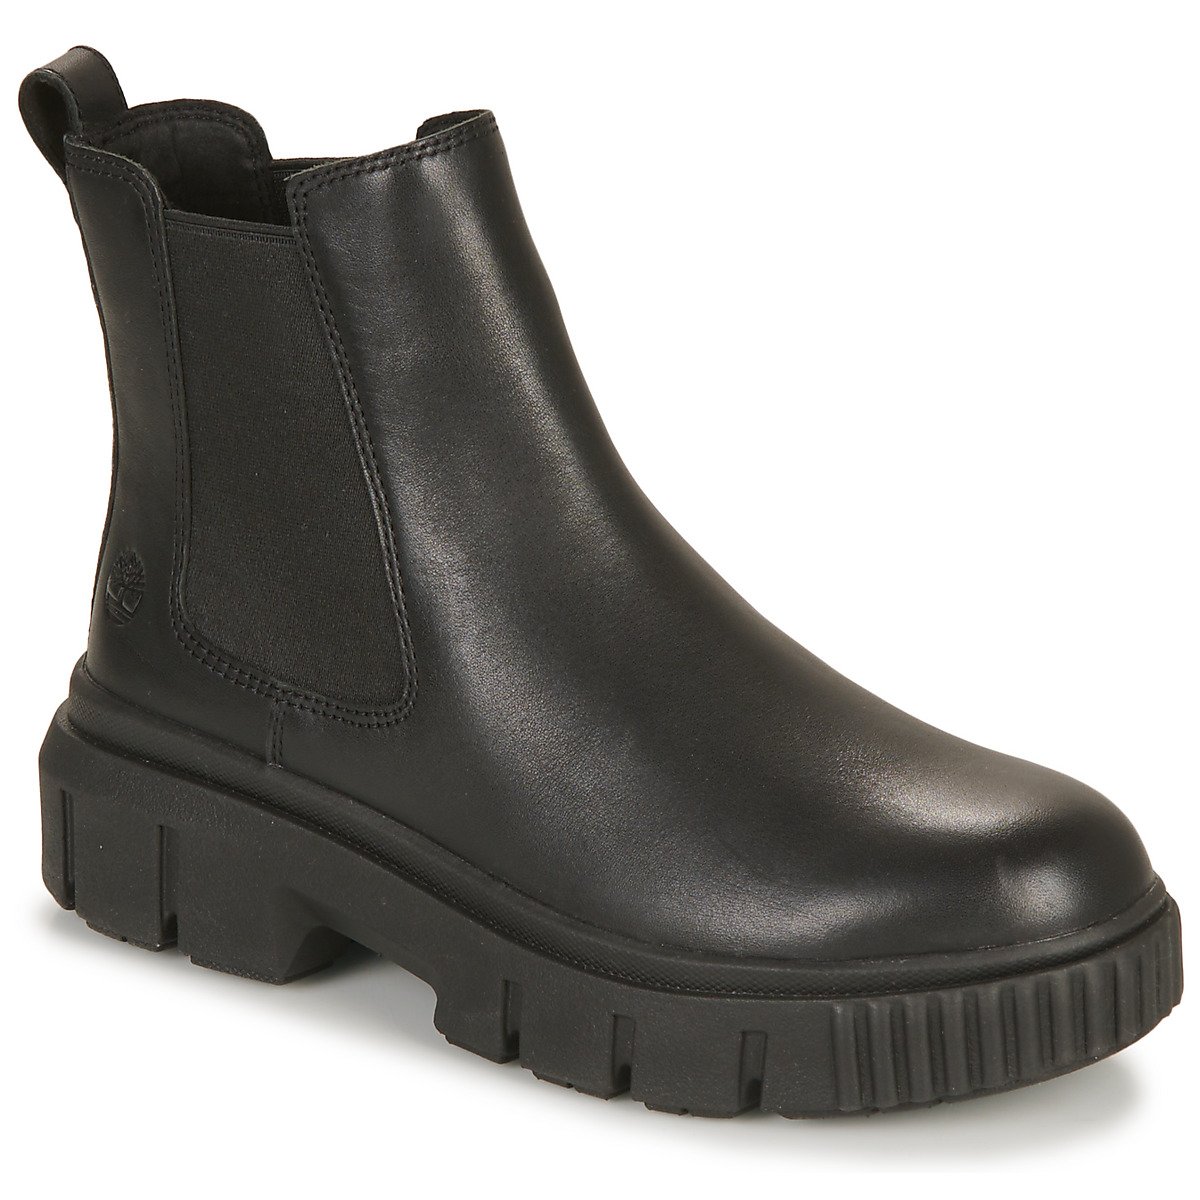 Greyfield Mid Boots "Black"